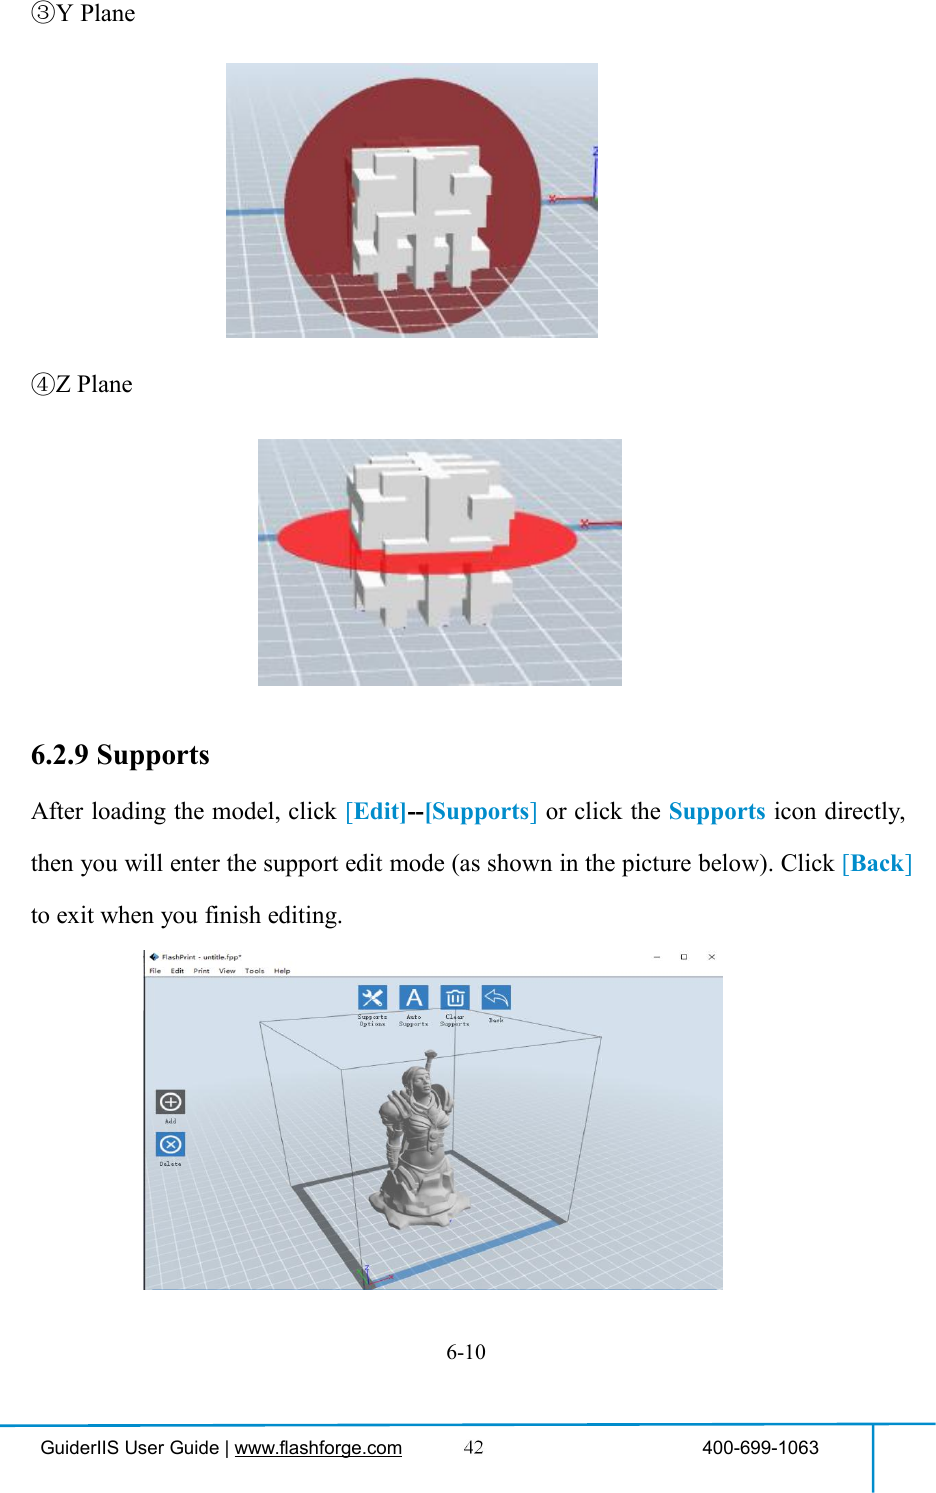 GuiderIIS User Guide | www.flashforge.com 400-699-1063③Y Plane④Z Plane6.2.9 SupportsAfter loading the model, click [Edit]--[Supports]or click the Supports icon directly,then you will enter the support edit mode (as shown in the picture below). Click [Back]to exit when you finish editing.6-10